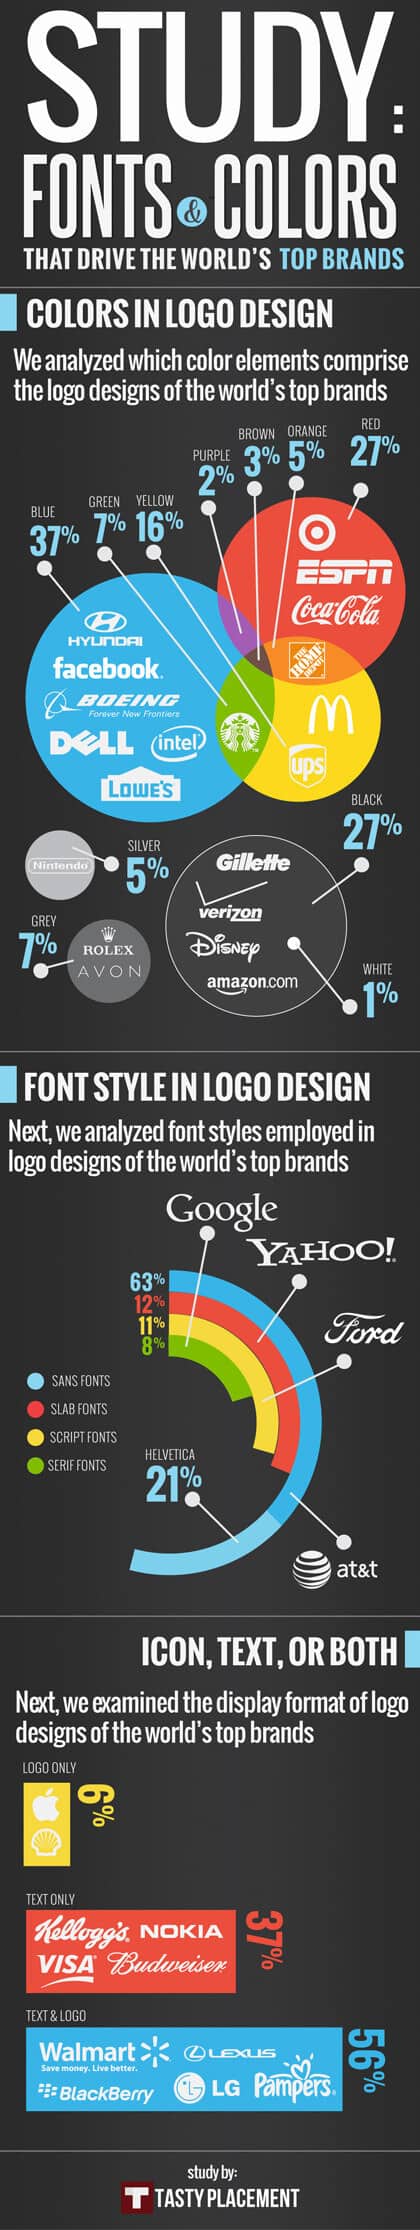 Choosing The Right Colors And Fonts For Your Brand